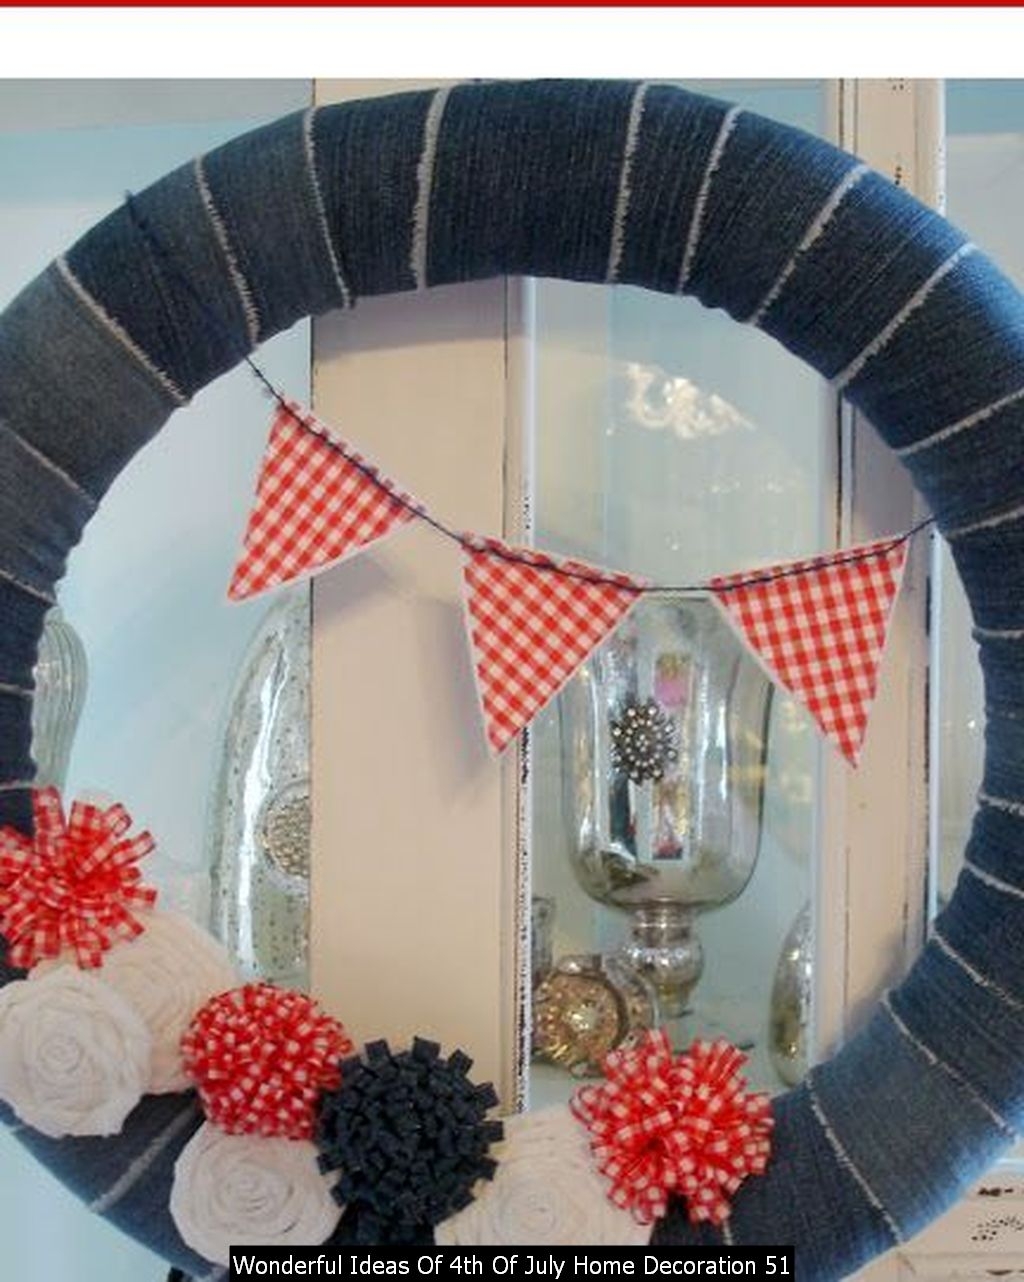 Wonderful Ideas Of 4th Of July Home Decoration 51